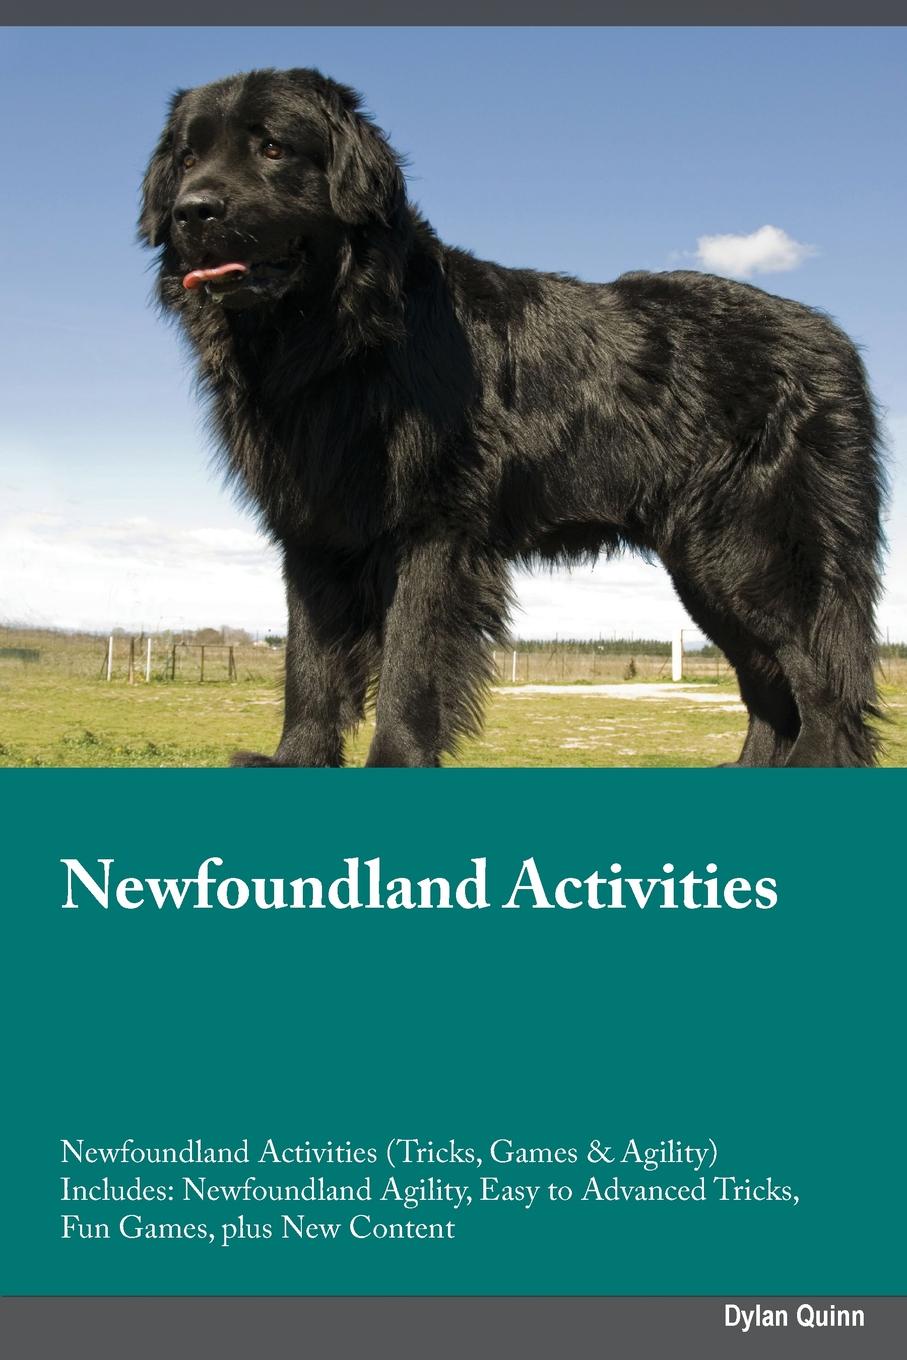 Newfoundland Activities Newfoundland Activities (Tricks, Games & Agility) Includes. Newfoundland Agility, Easy to Advanced Tricks, Fun Games, plus New Content